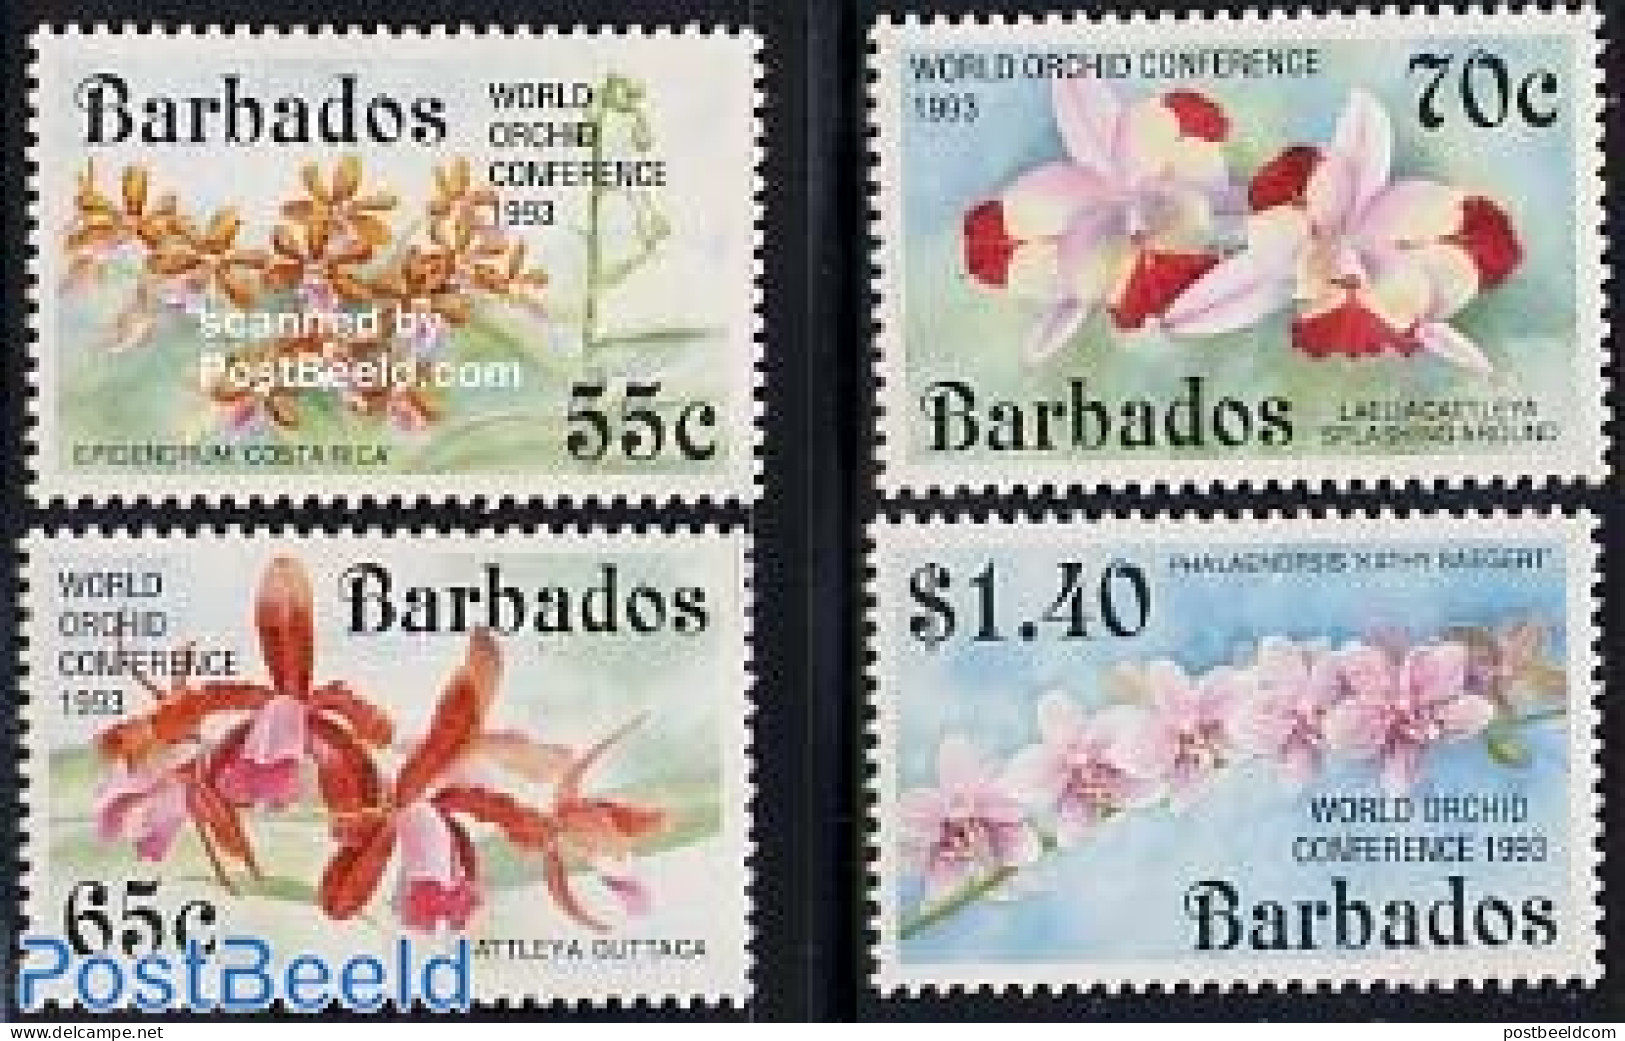 Barbados 1993 Orchid Conference 4v, Mint NH, Nature - Flowers & Plants - Orchids - Barbados (1966-...)